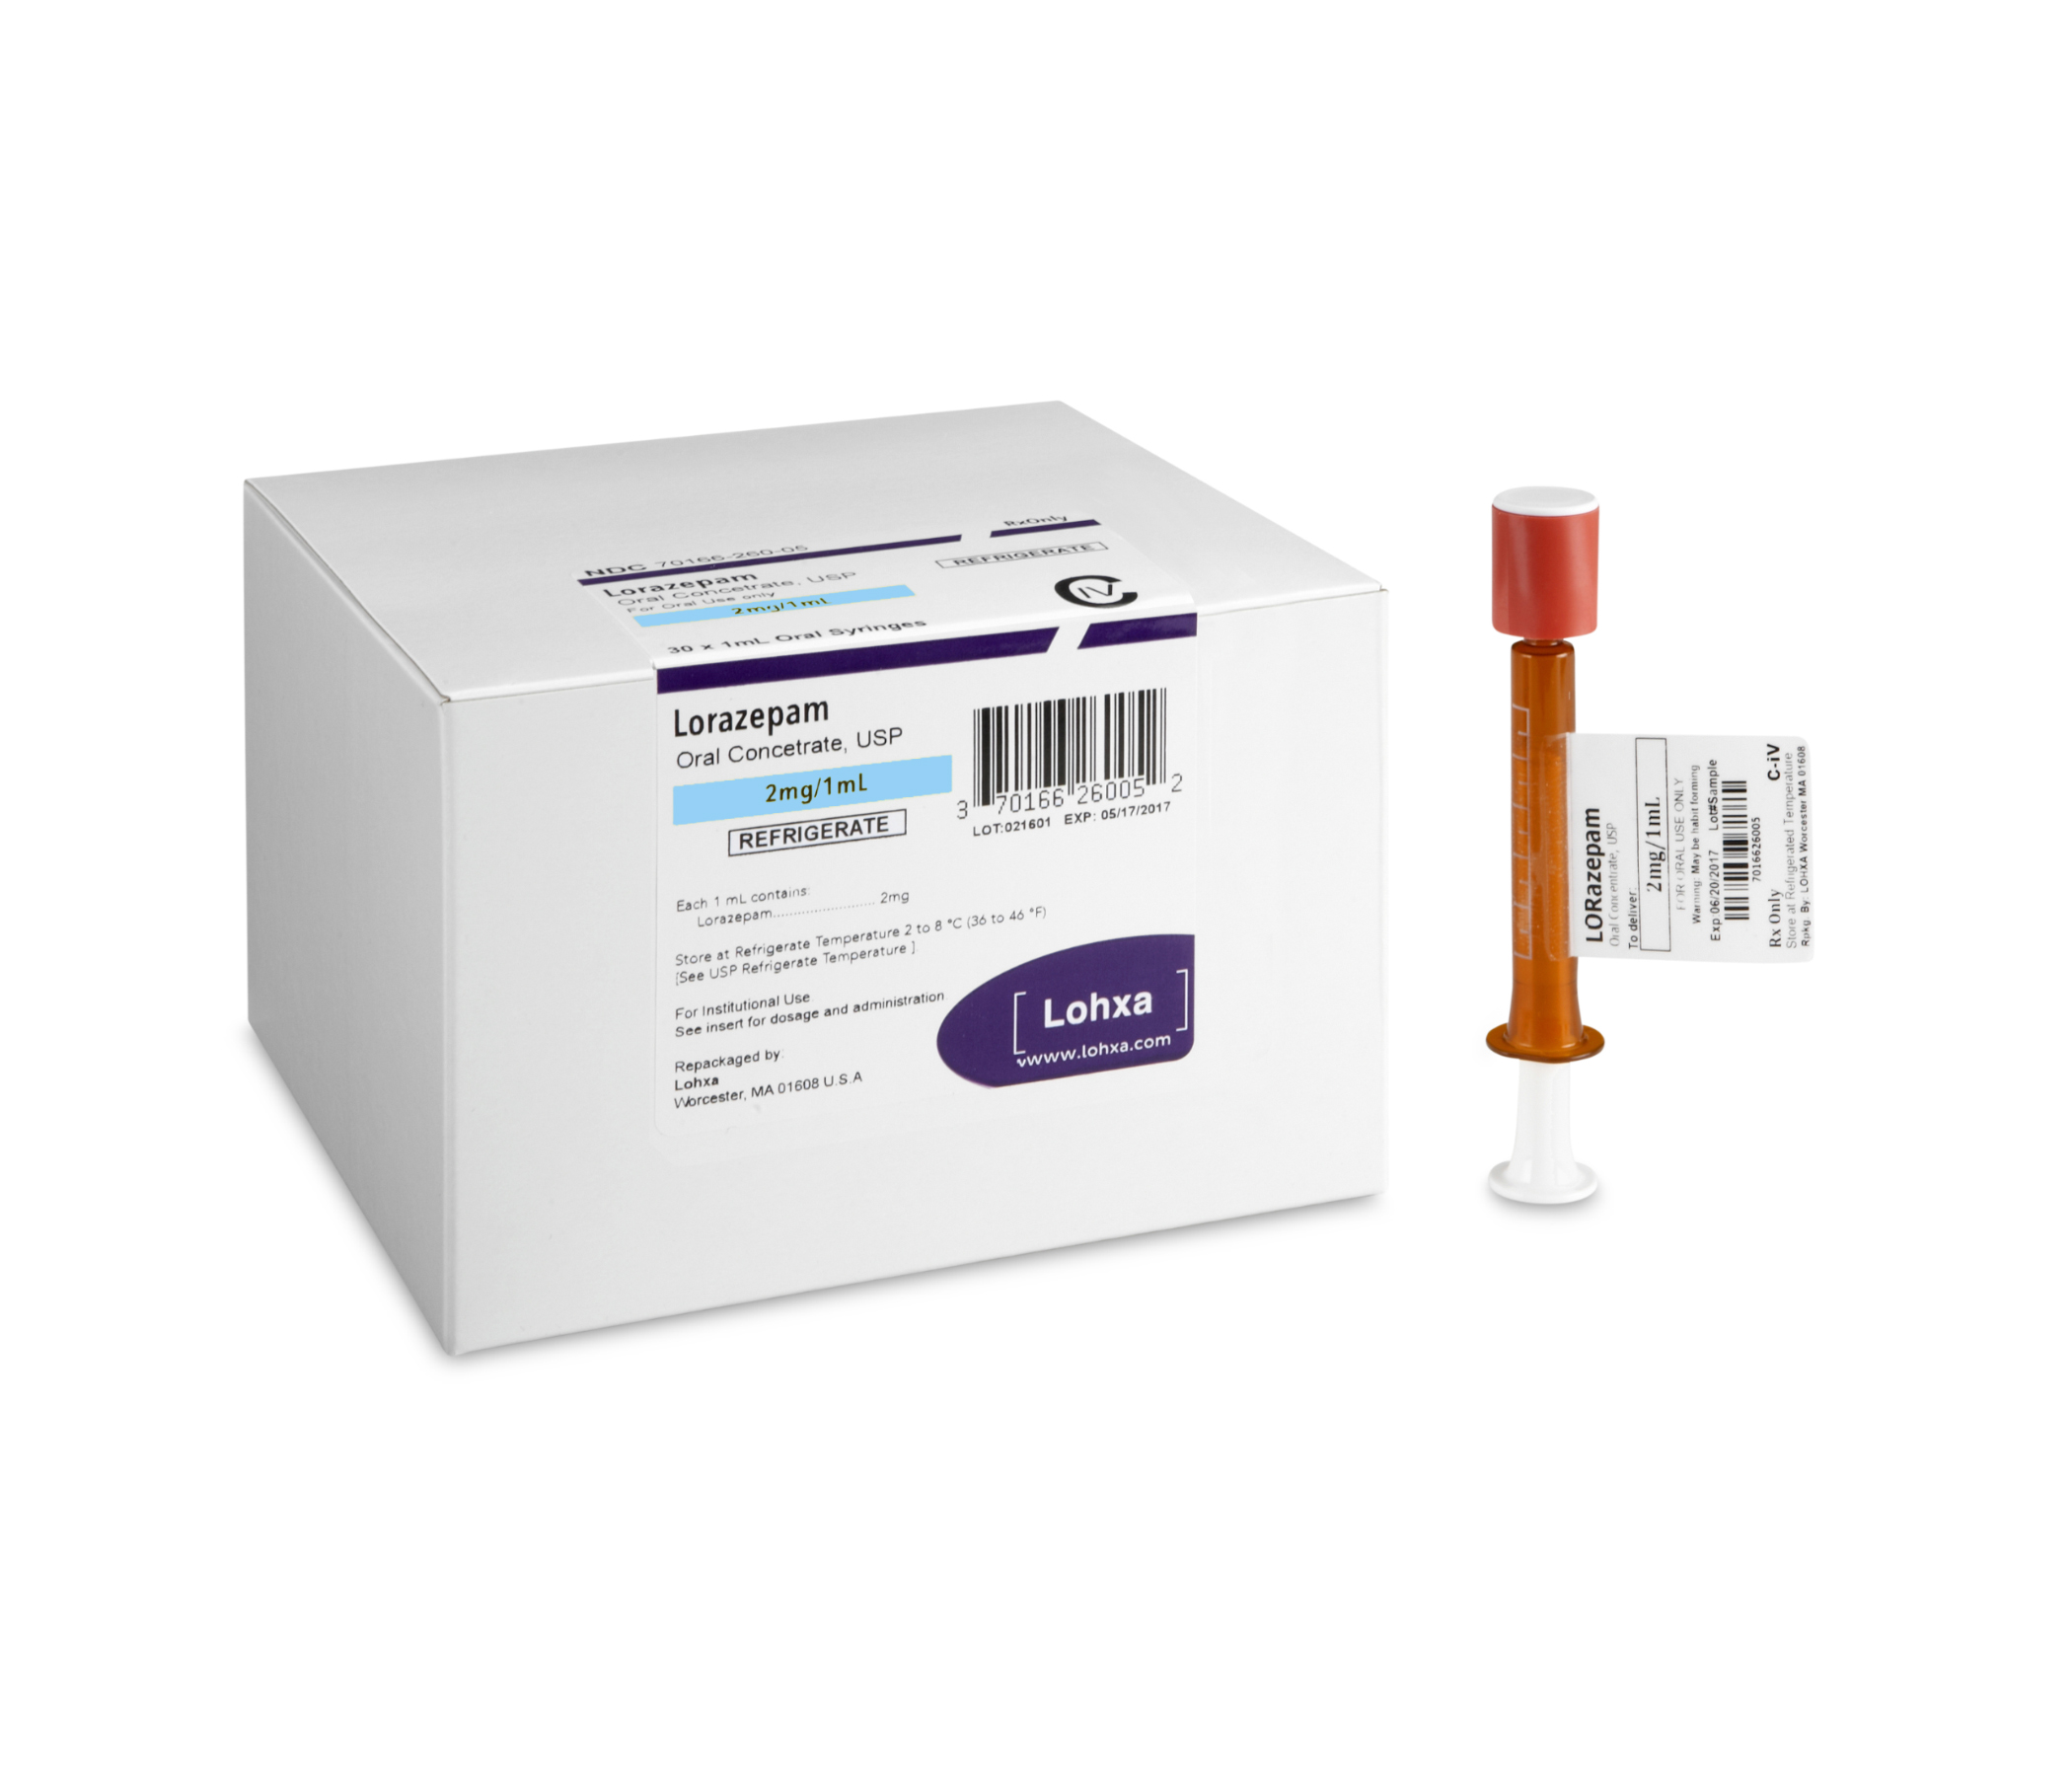 2mg lorazepam oral ml concentrate